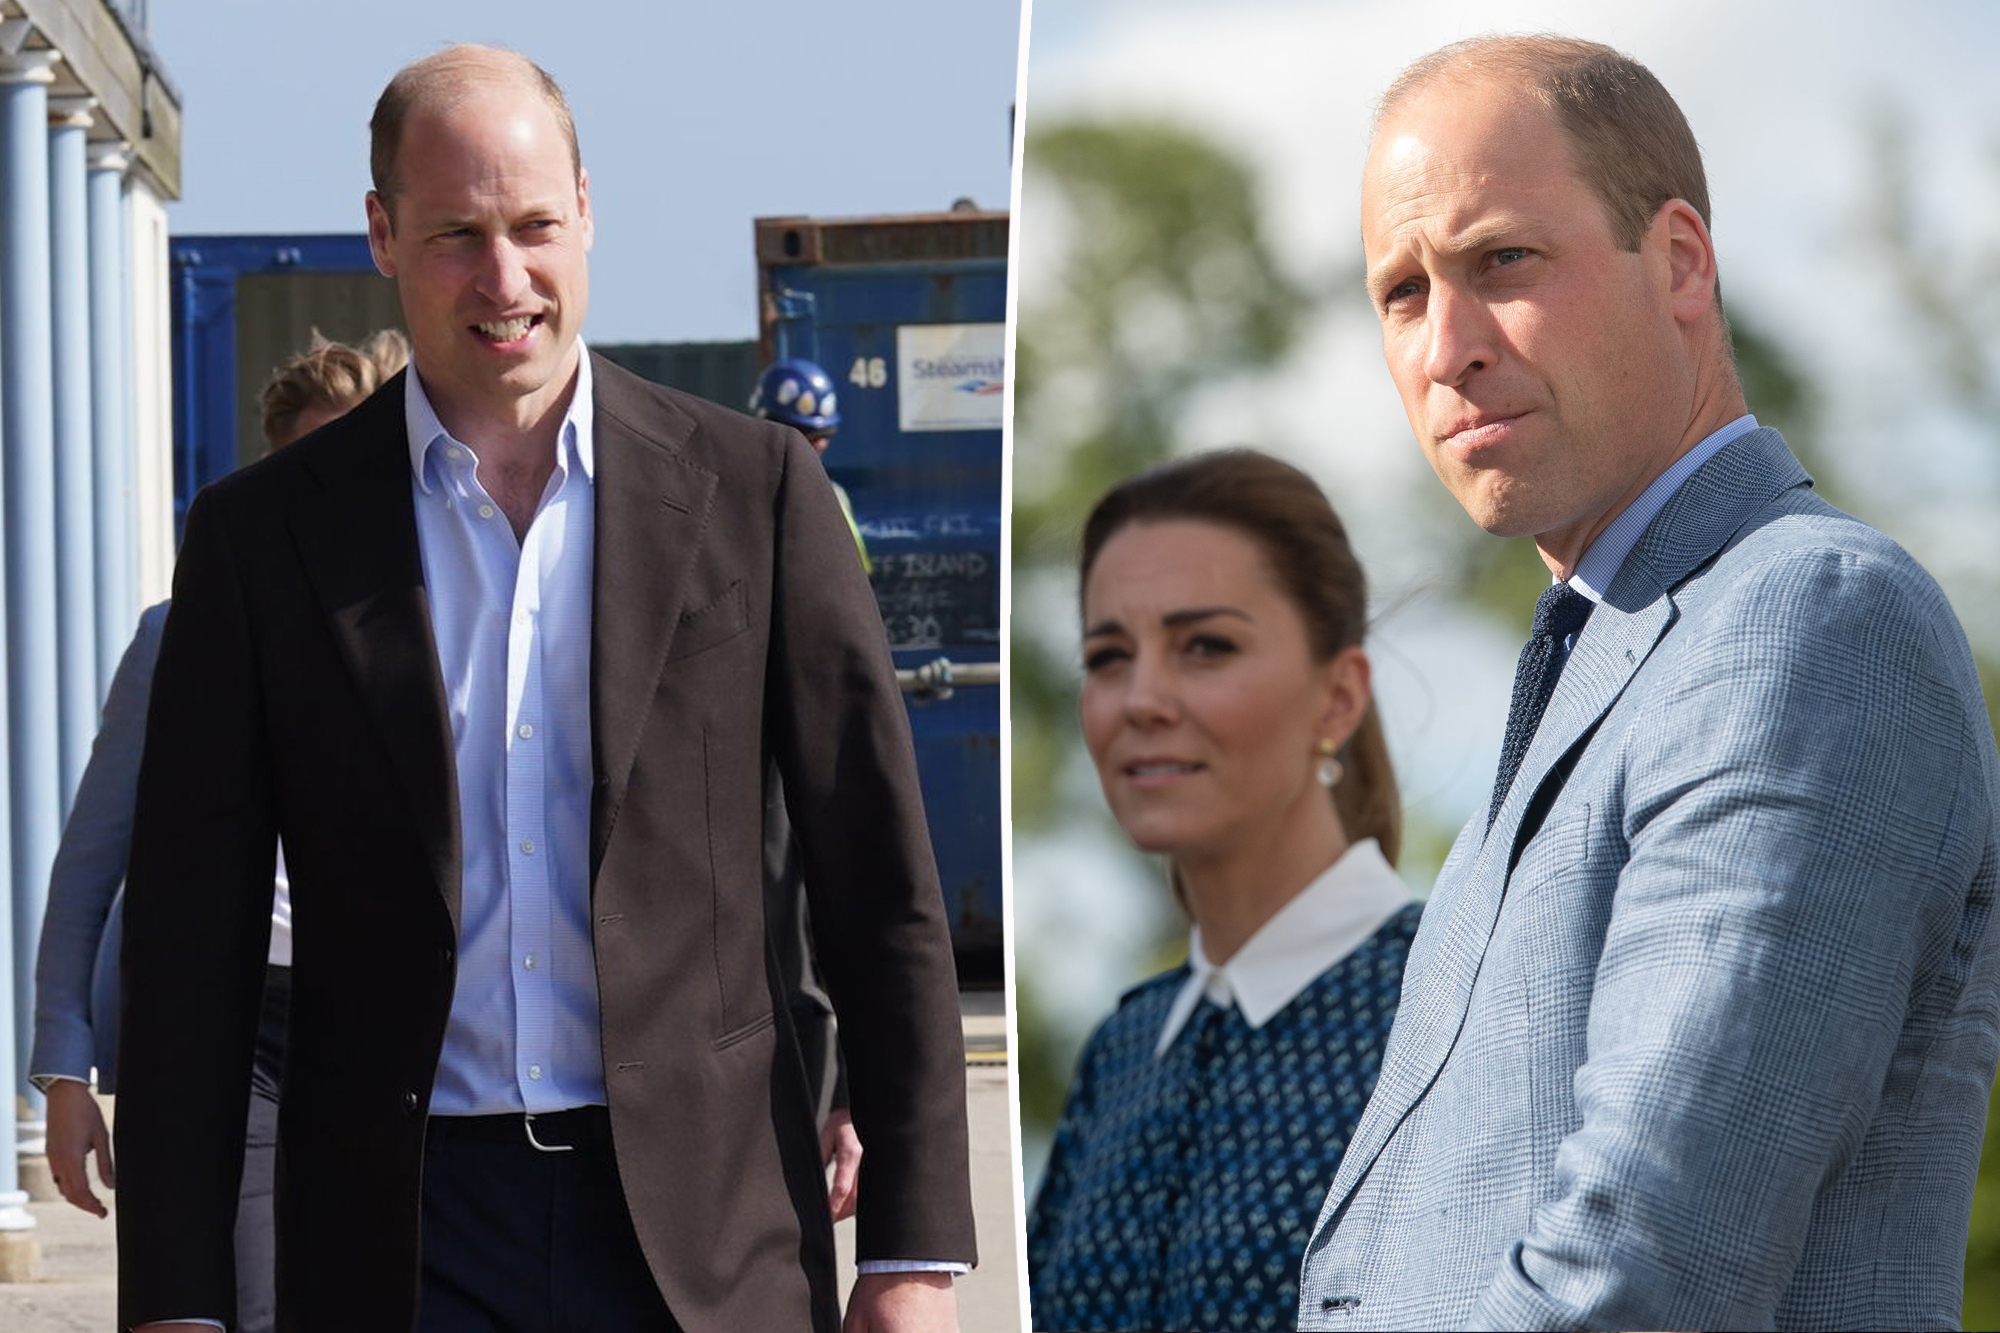 Prince William's Reaction to Online Rumors About Kate Middleton Revealed